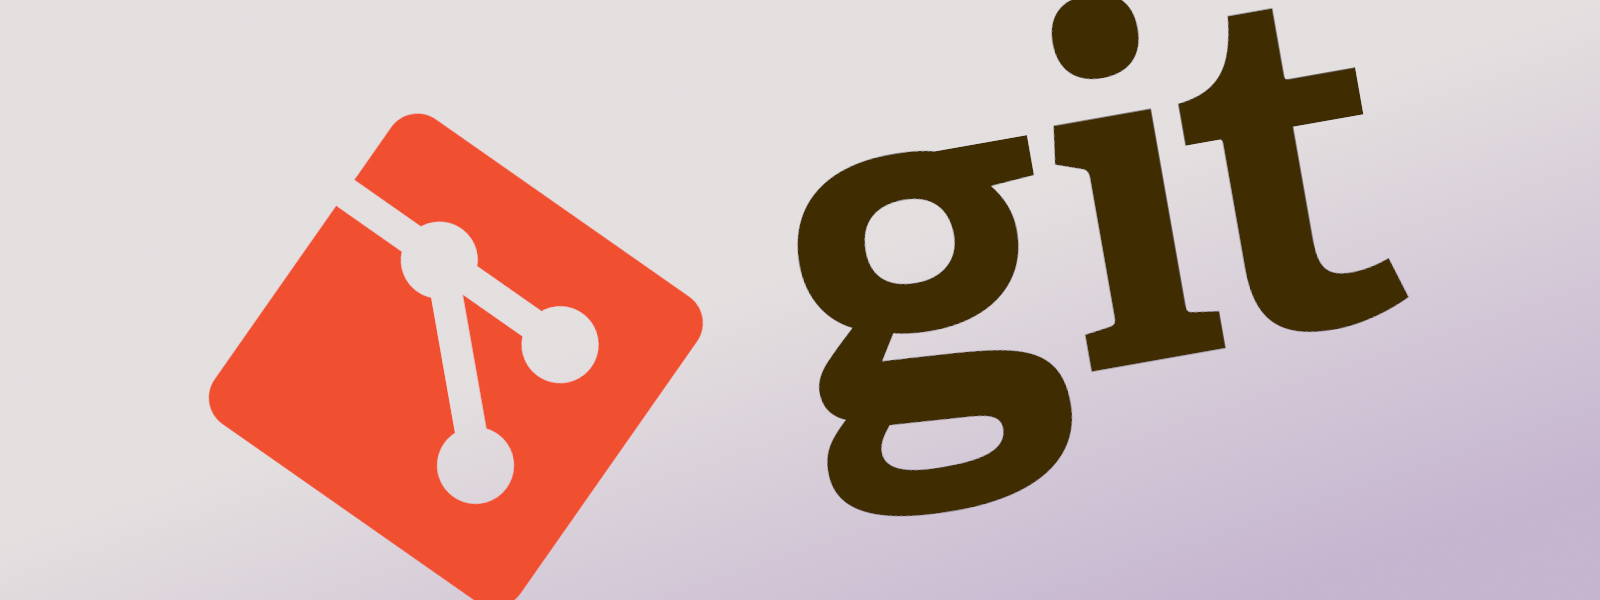 Our Journey to GIT—One year later